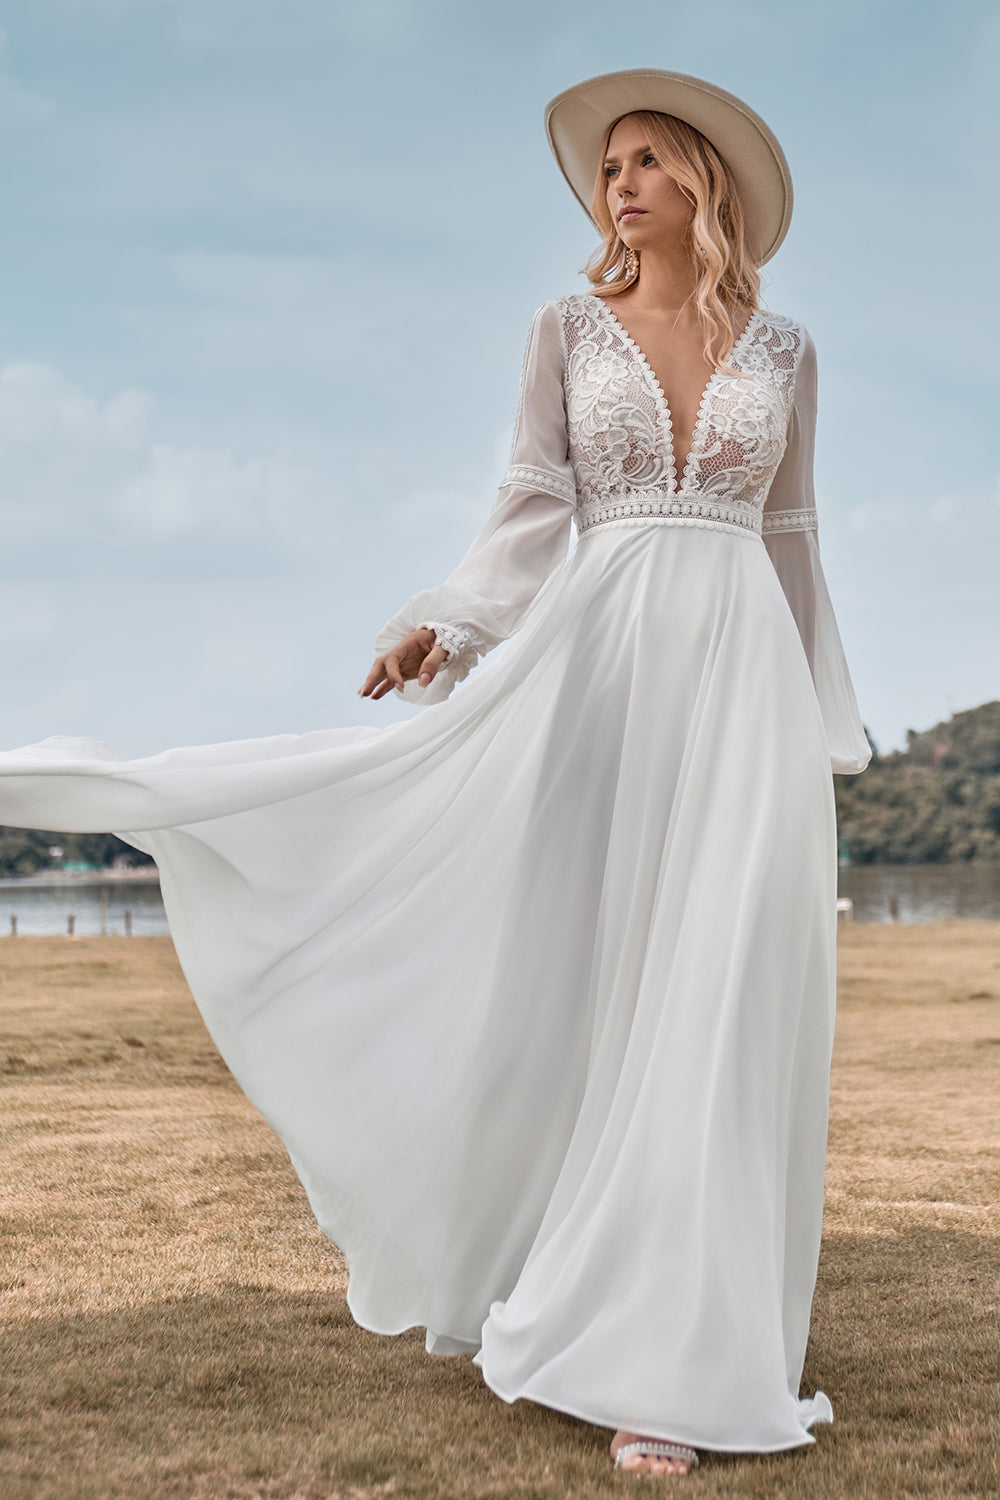 A-Line Long Sleeves Ivory Wedding Dress with Lace